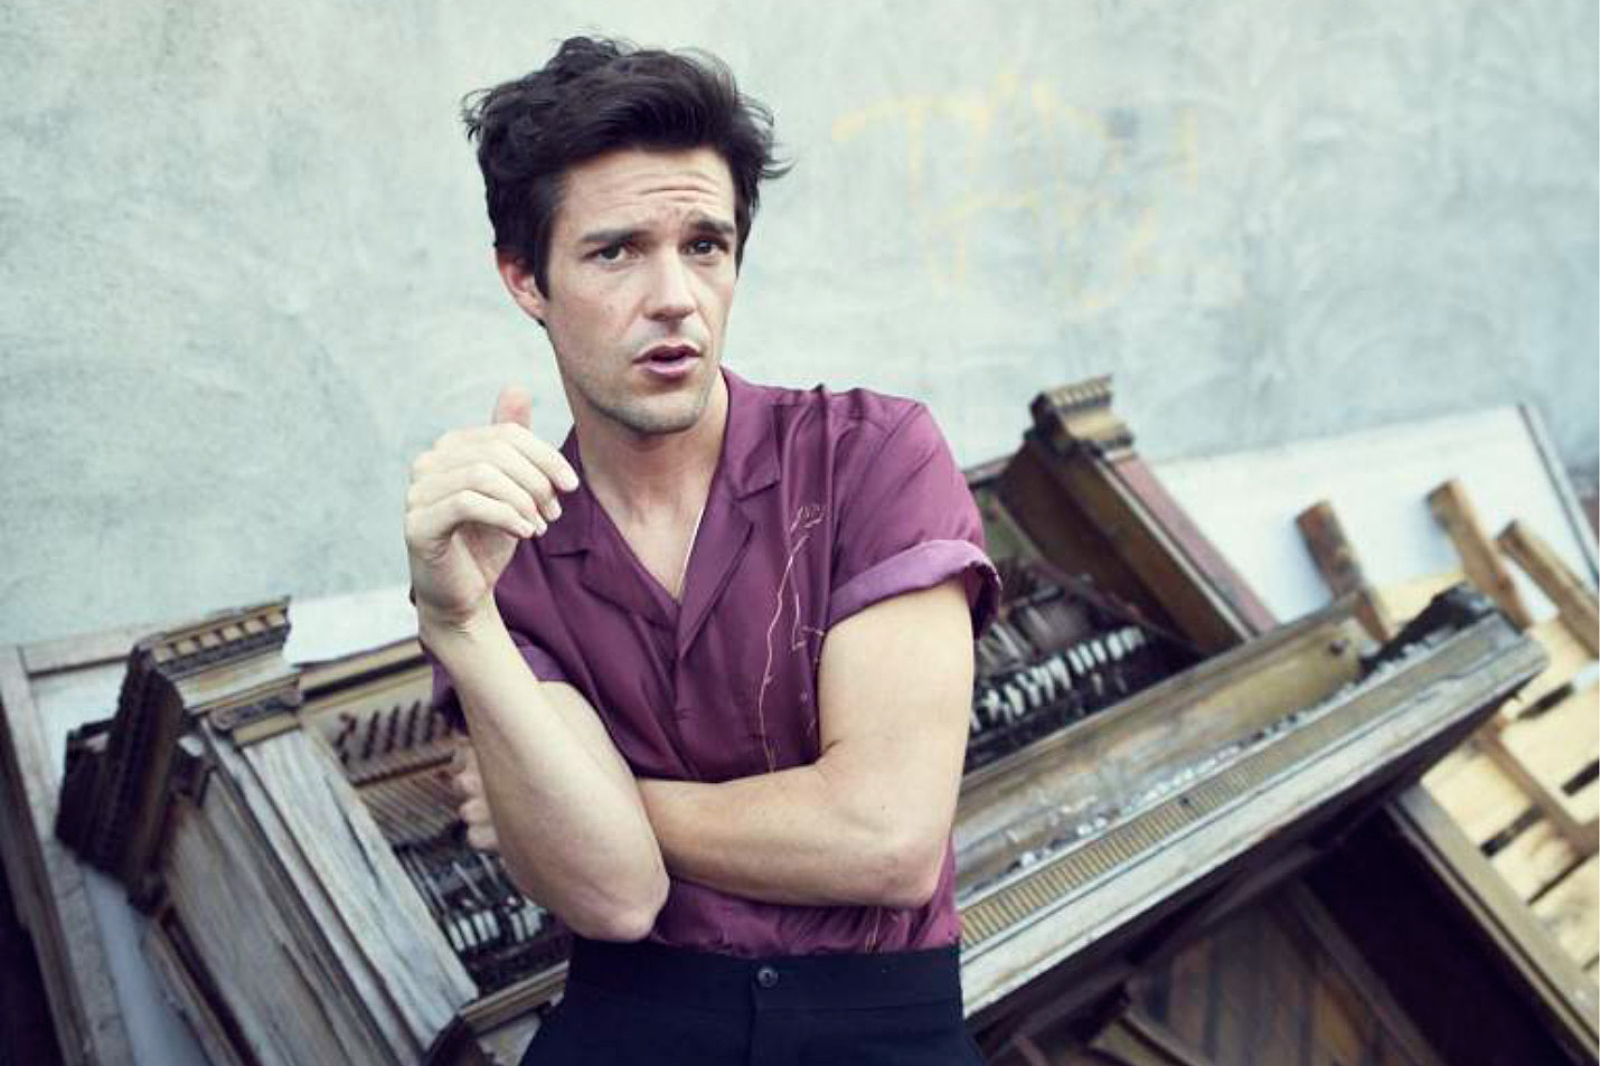 Brandon Flowers covers The White Stripes 'Fell In Love With A Girl' at MoPop